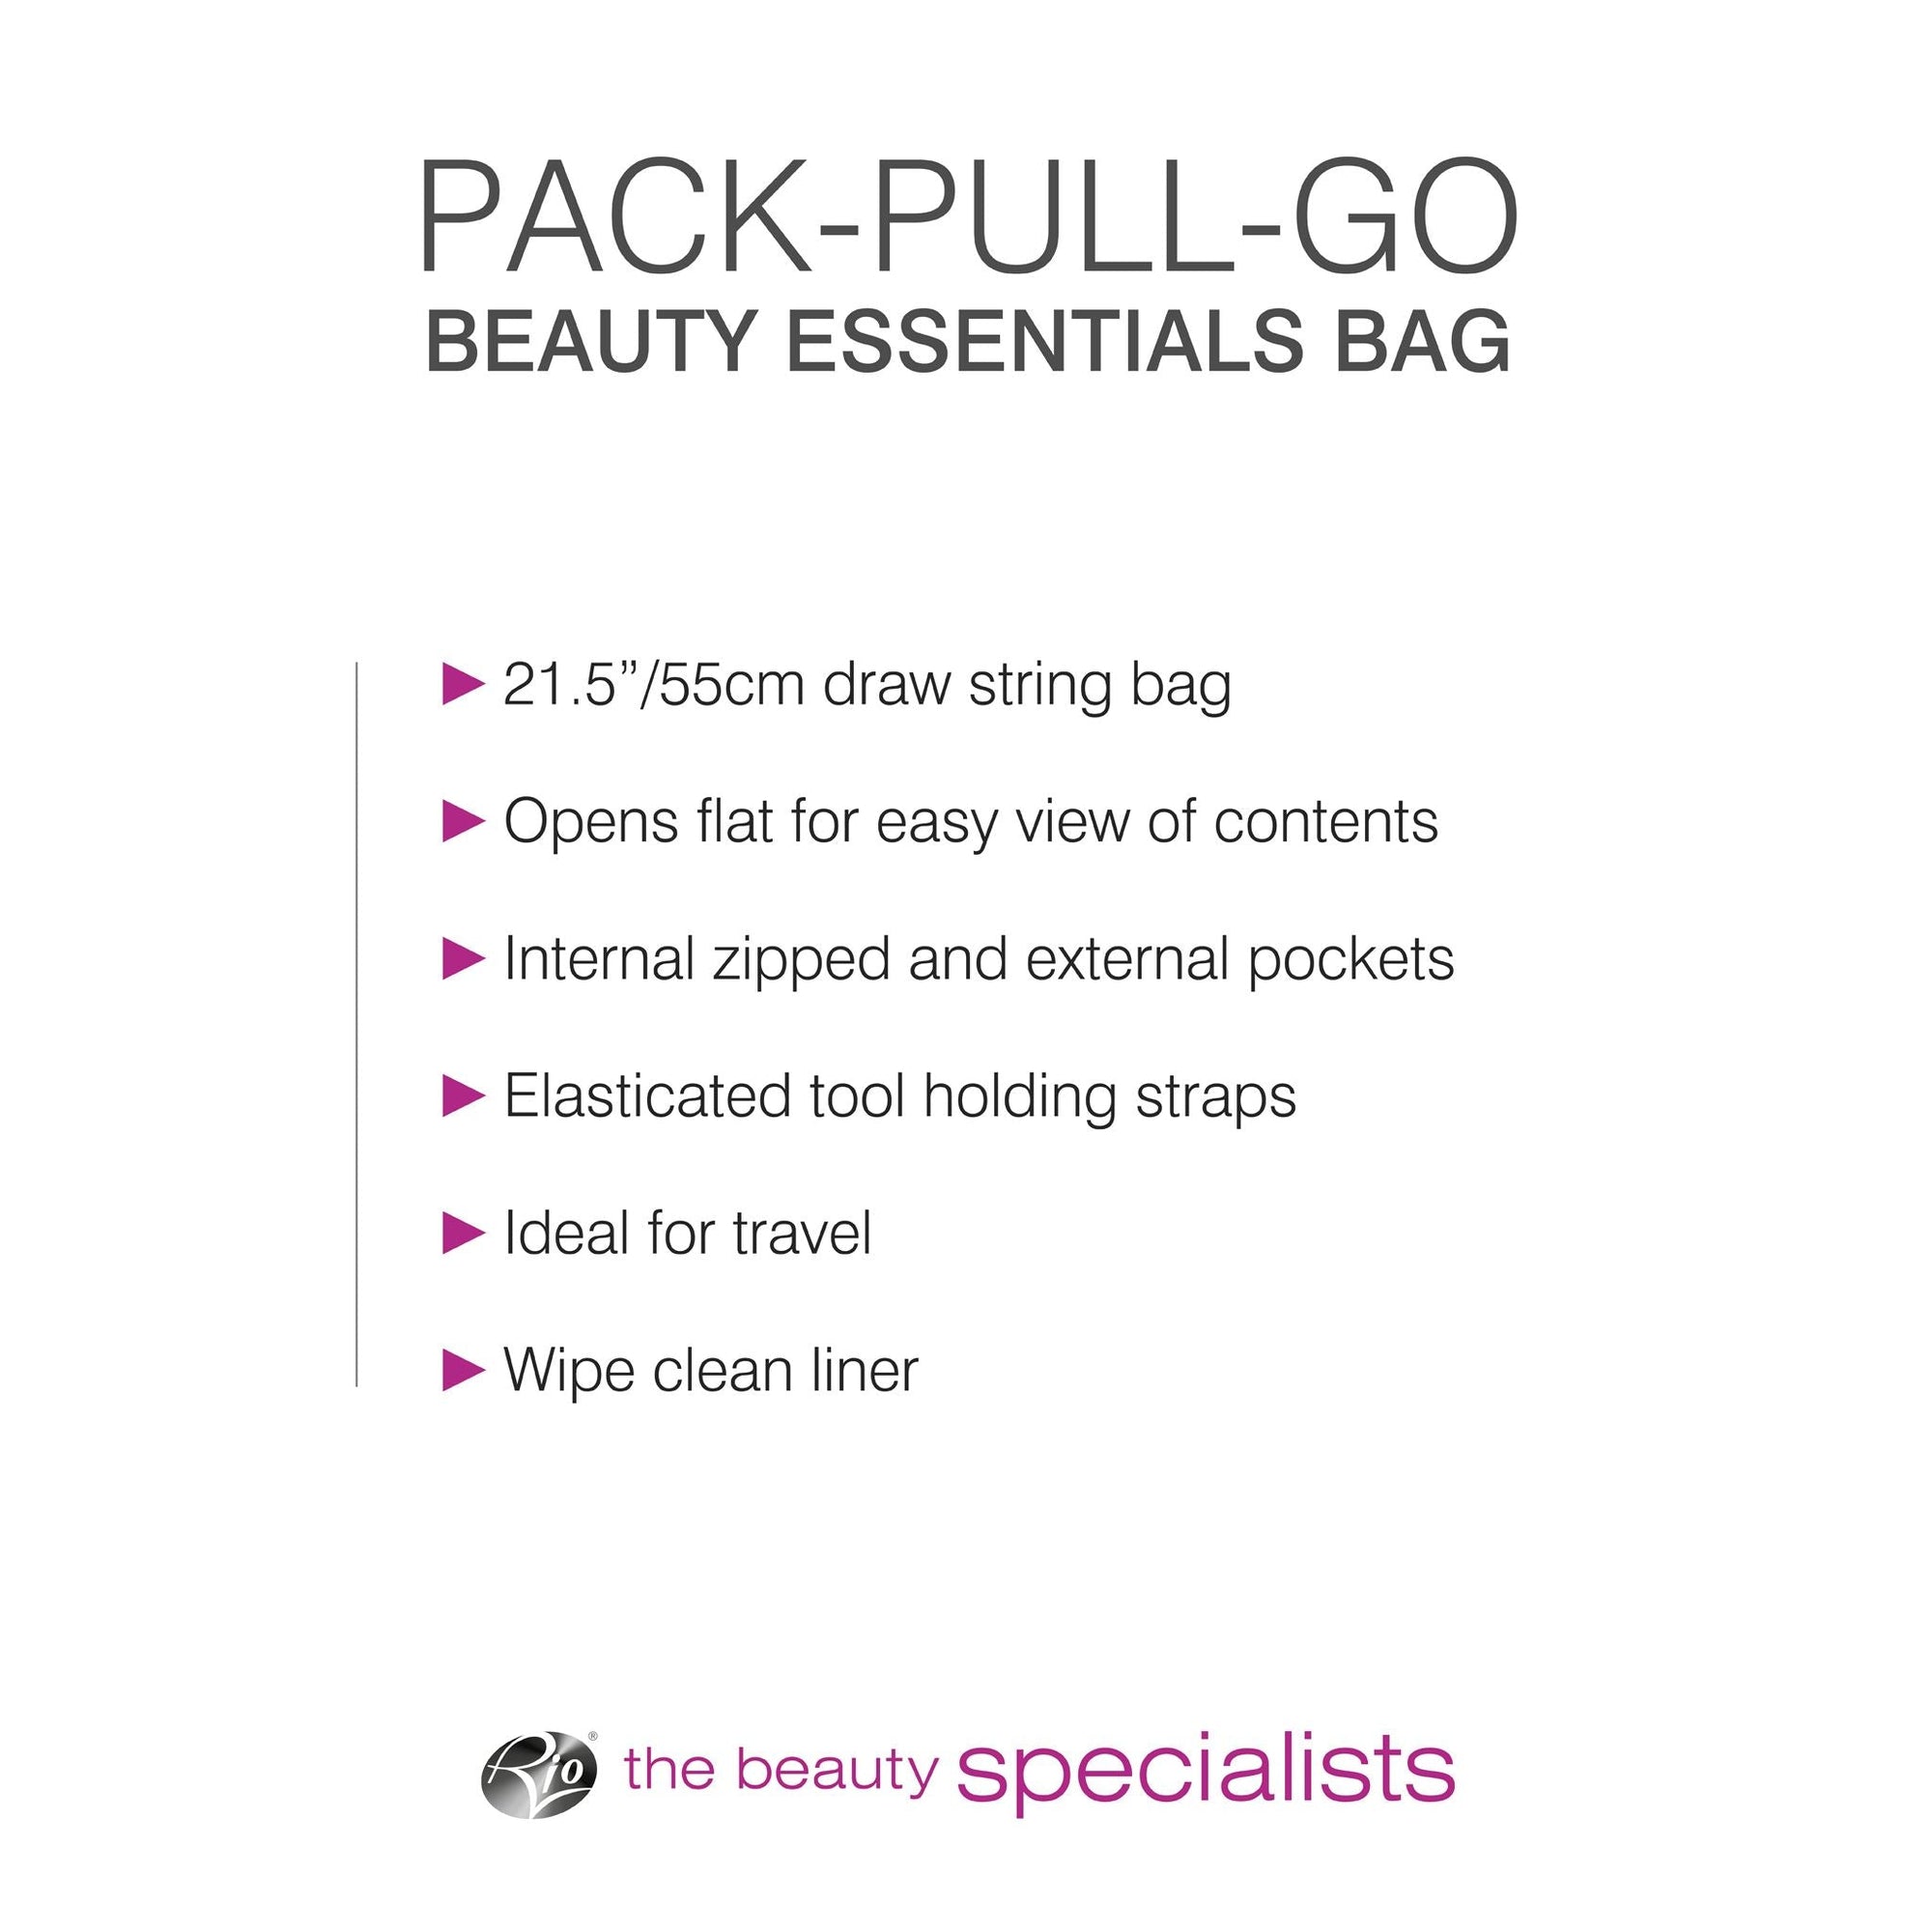 Pack-Pull-Go Beauty Essentials Bag